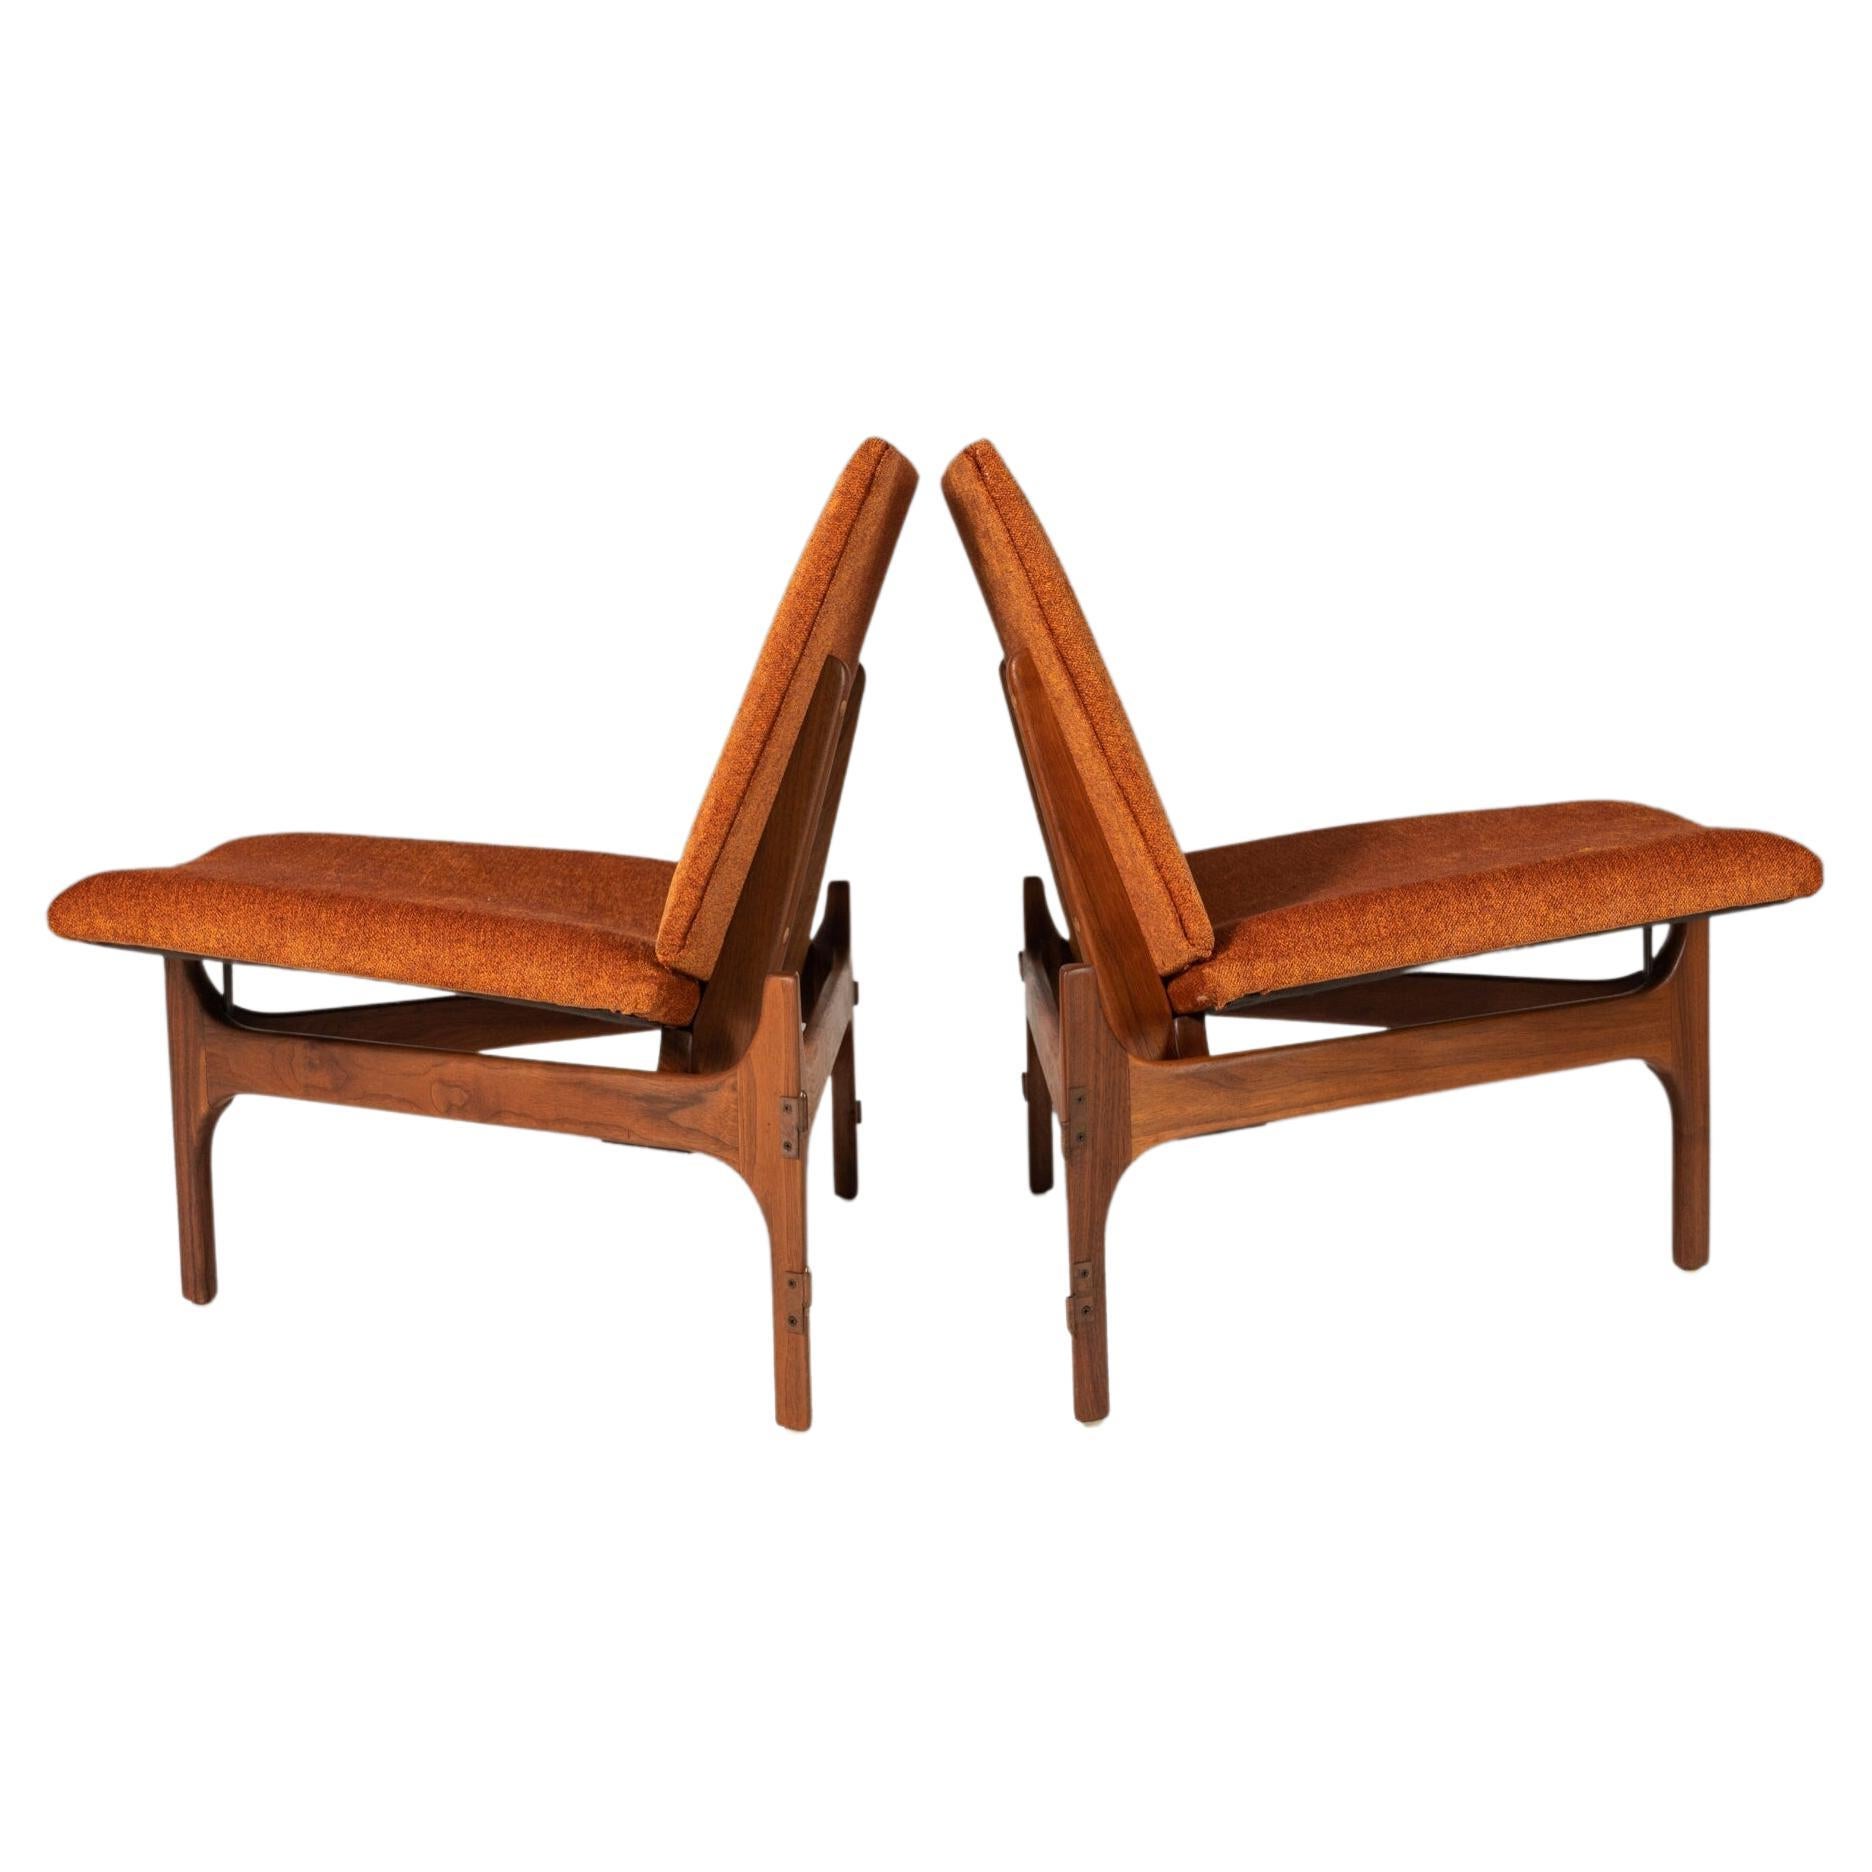 Set of Two ( 2 ) Triangular Low Profile Chairs in Walnut by John Keal for Brown  For Sale